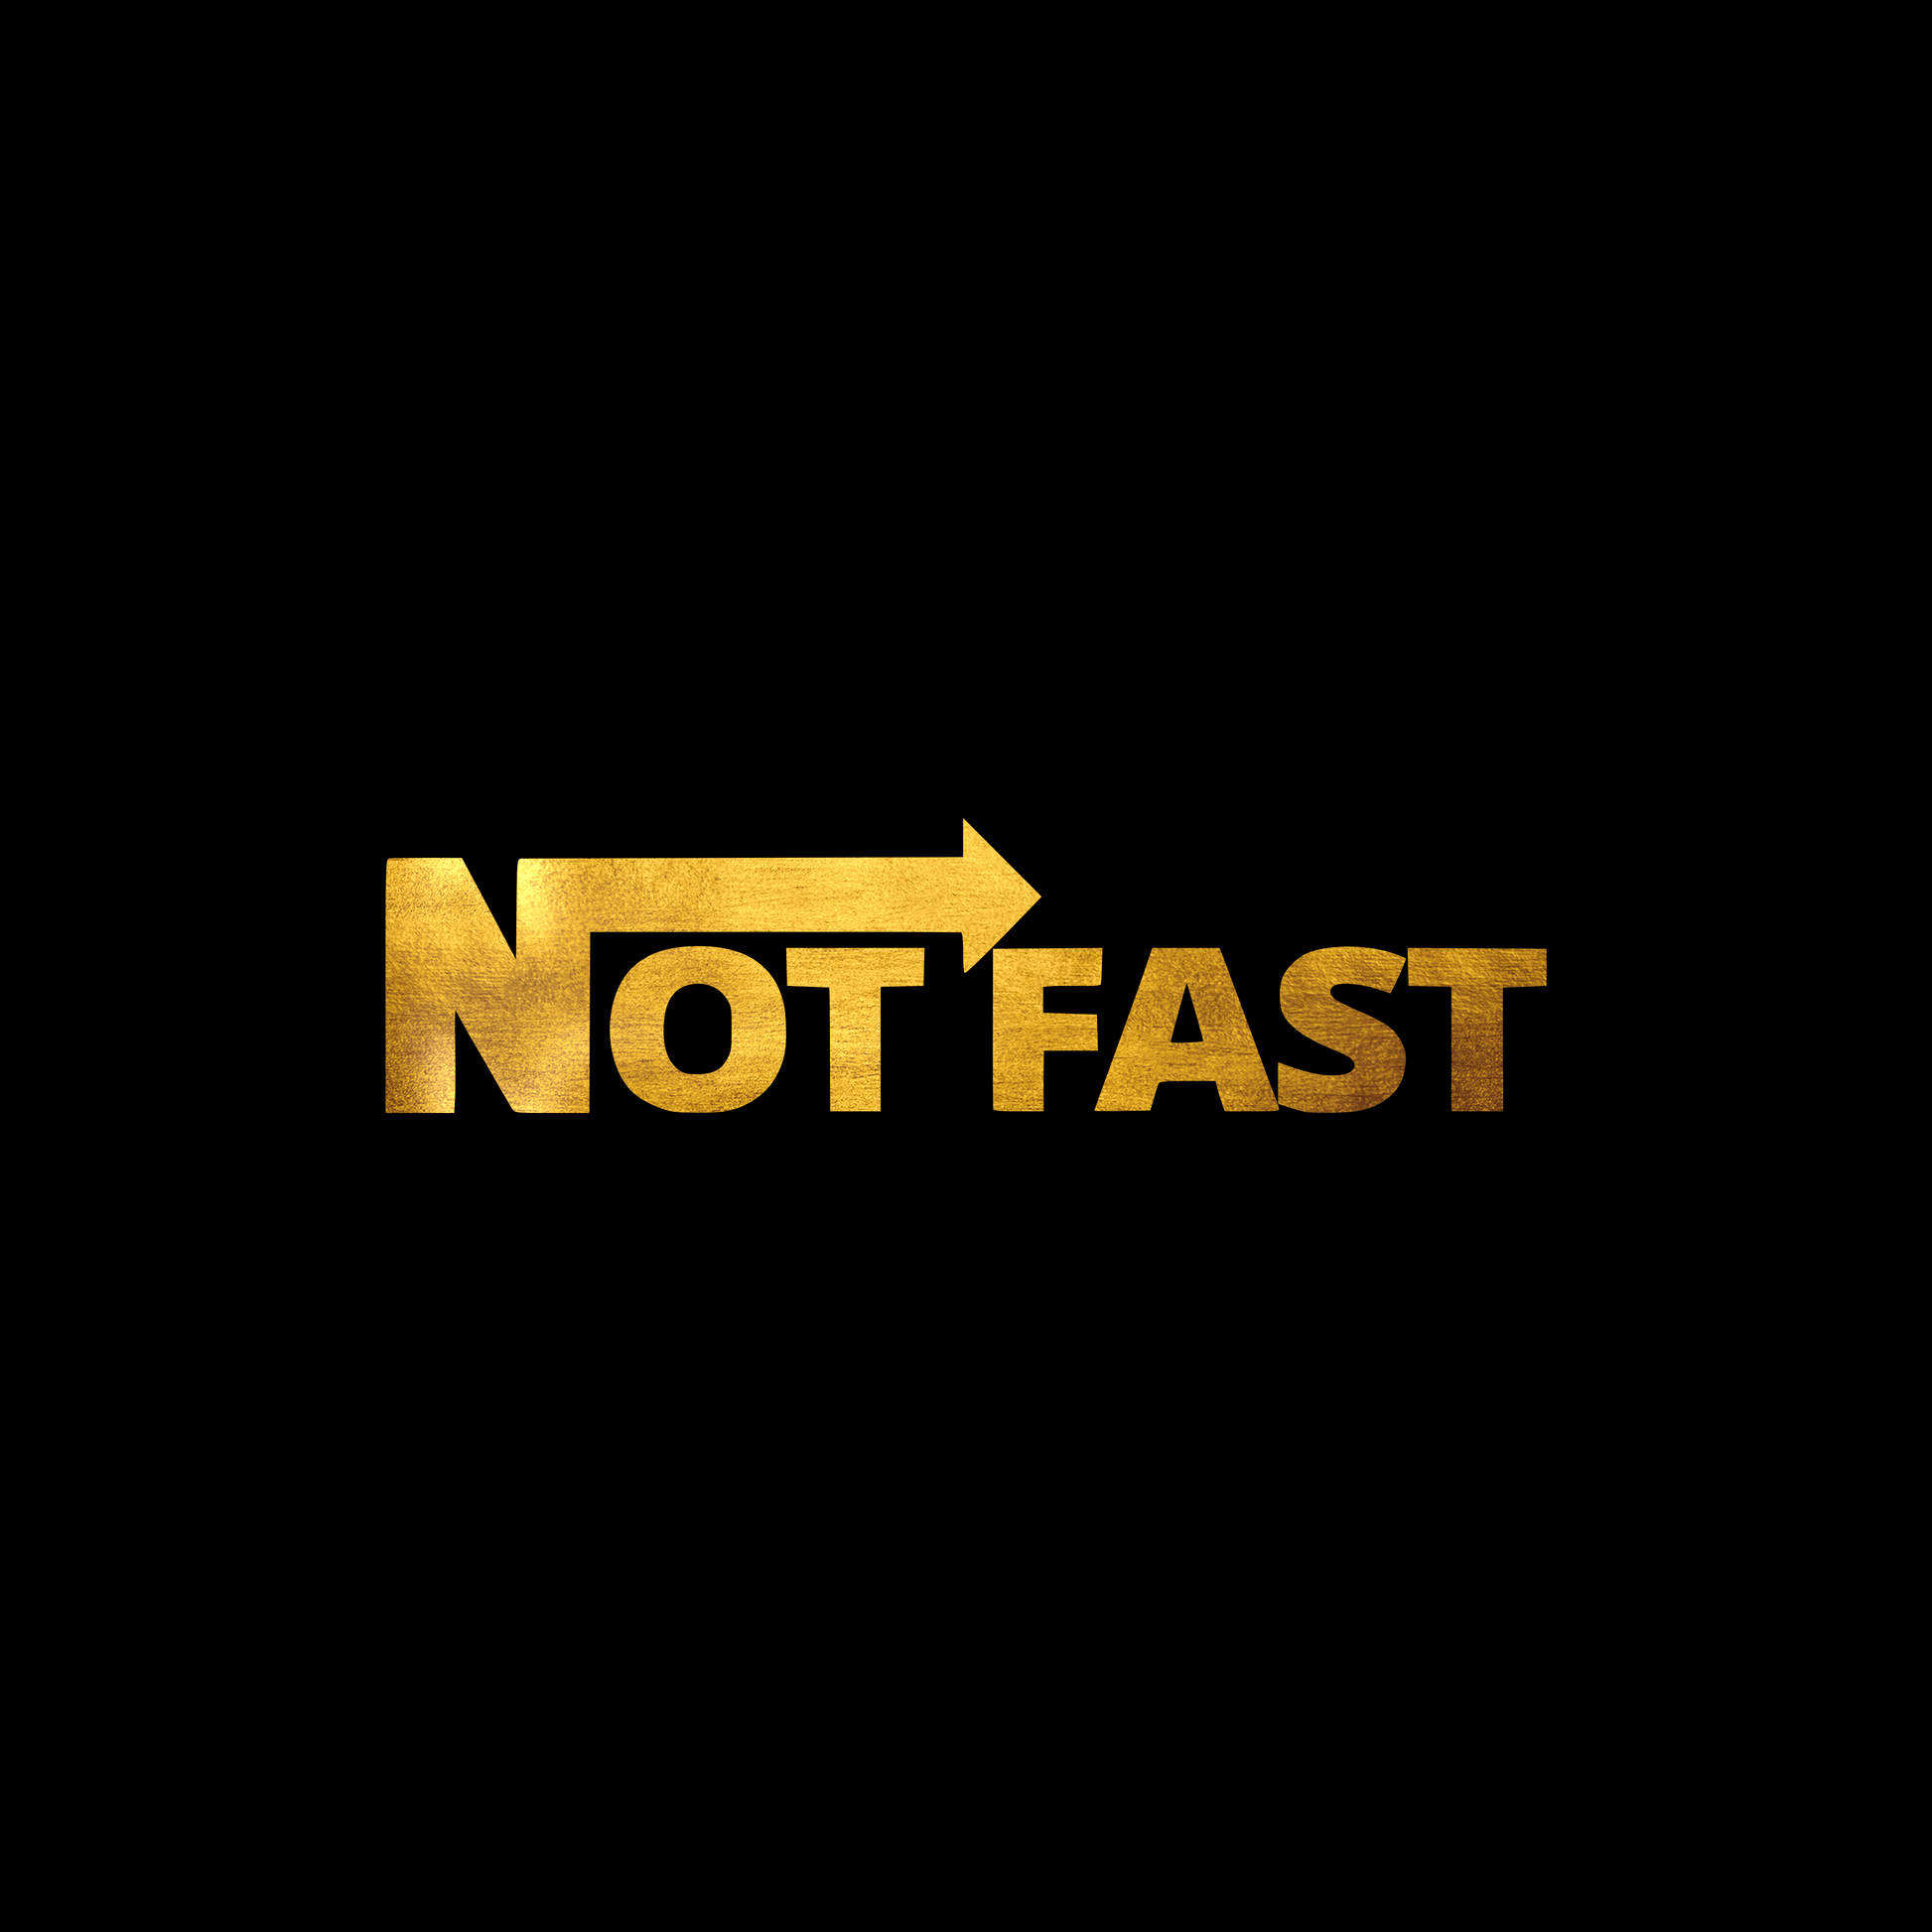 Not fast sticker decal